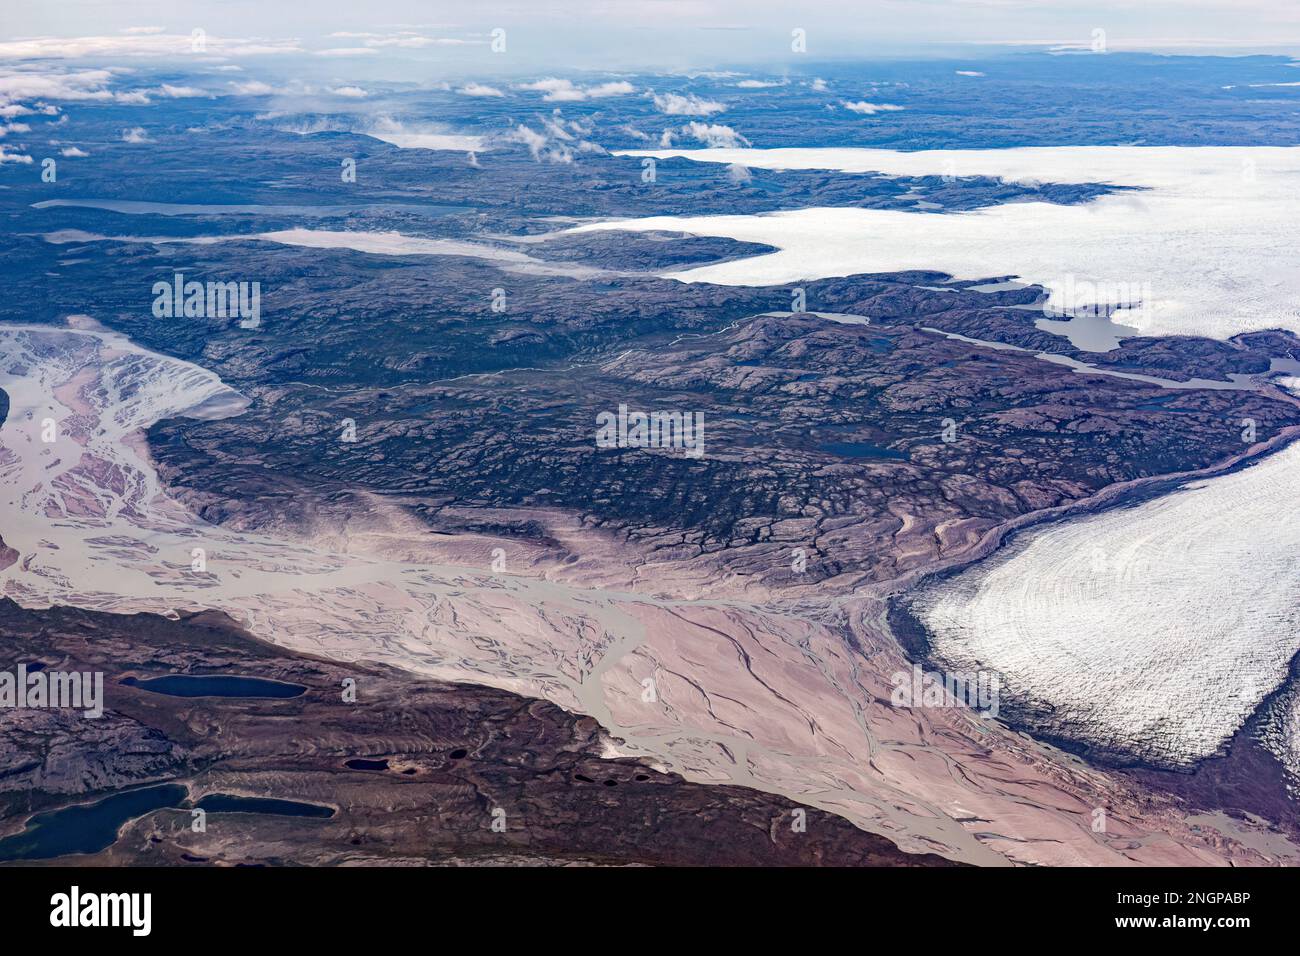 An aerial view of the Greenland ice cap from a commercial flight to Kangerlussuaq, Western Greenland. Stock Photo